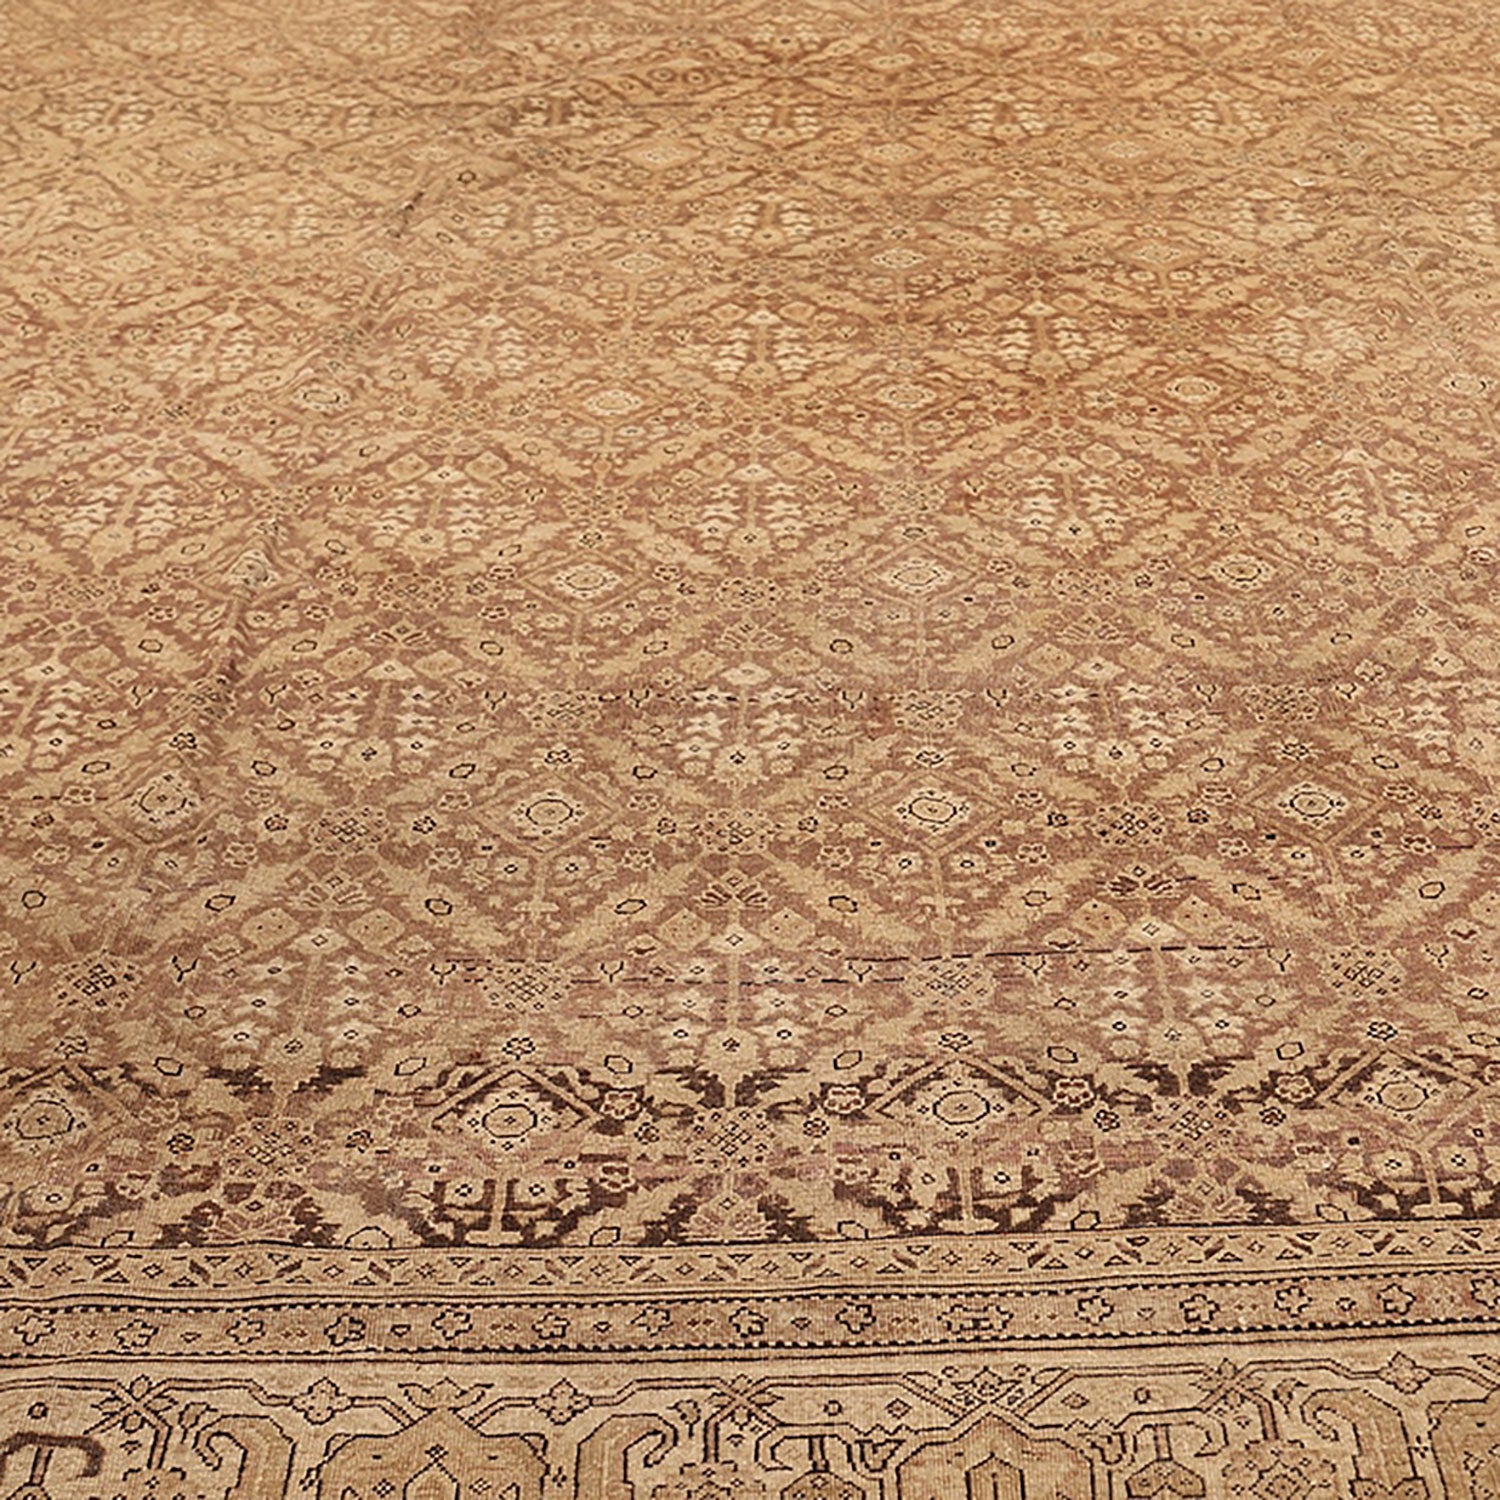 Close-up of a meticulously crafted, symmetrical rug with intricate patterns